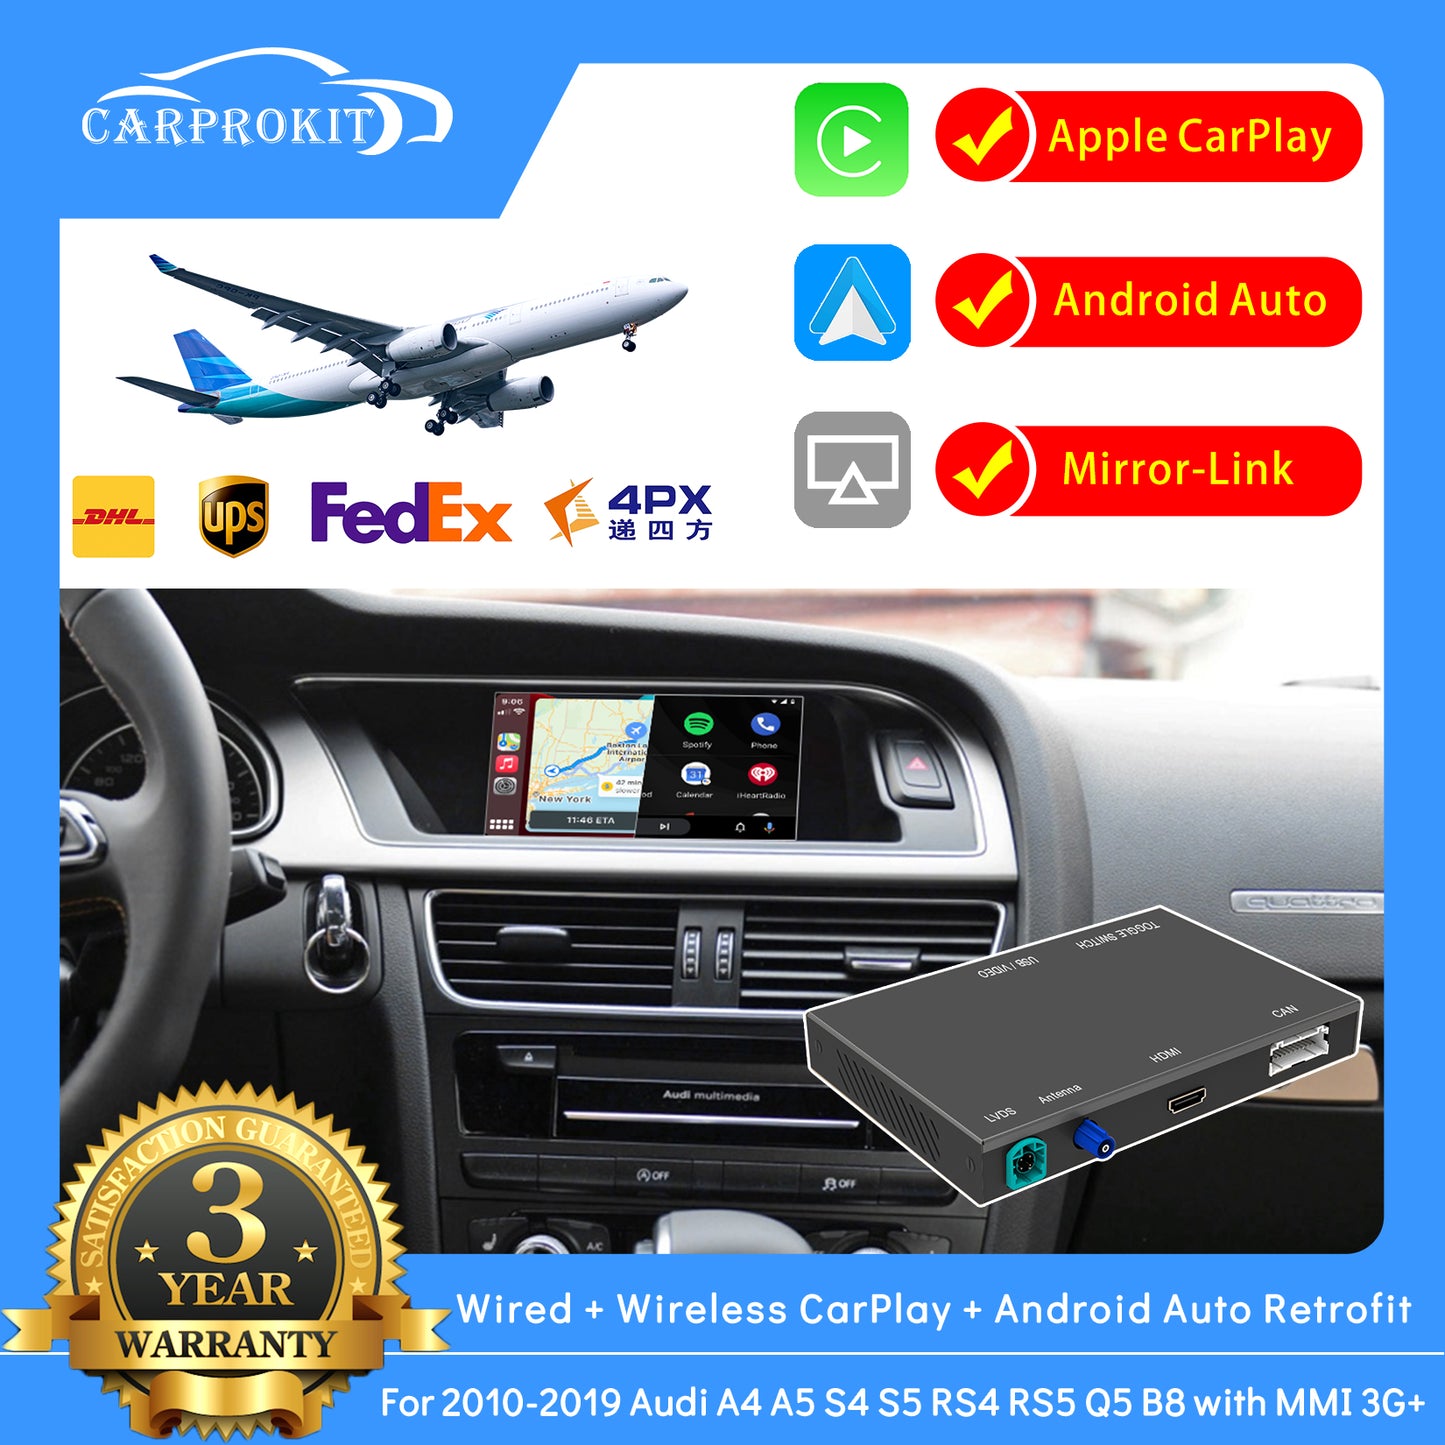 CarProKit Wireless CarPlay Android Auto AirPlay USB Mirroring YouTube Retrofit Module Kit Fit for Audi A4 A5 S4 S5 RS4 RS5 Q5 B8 MMI 3G+ 2010-2019